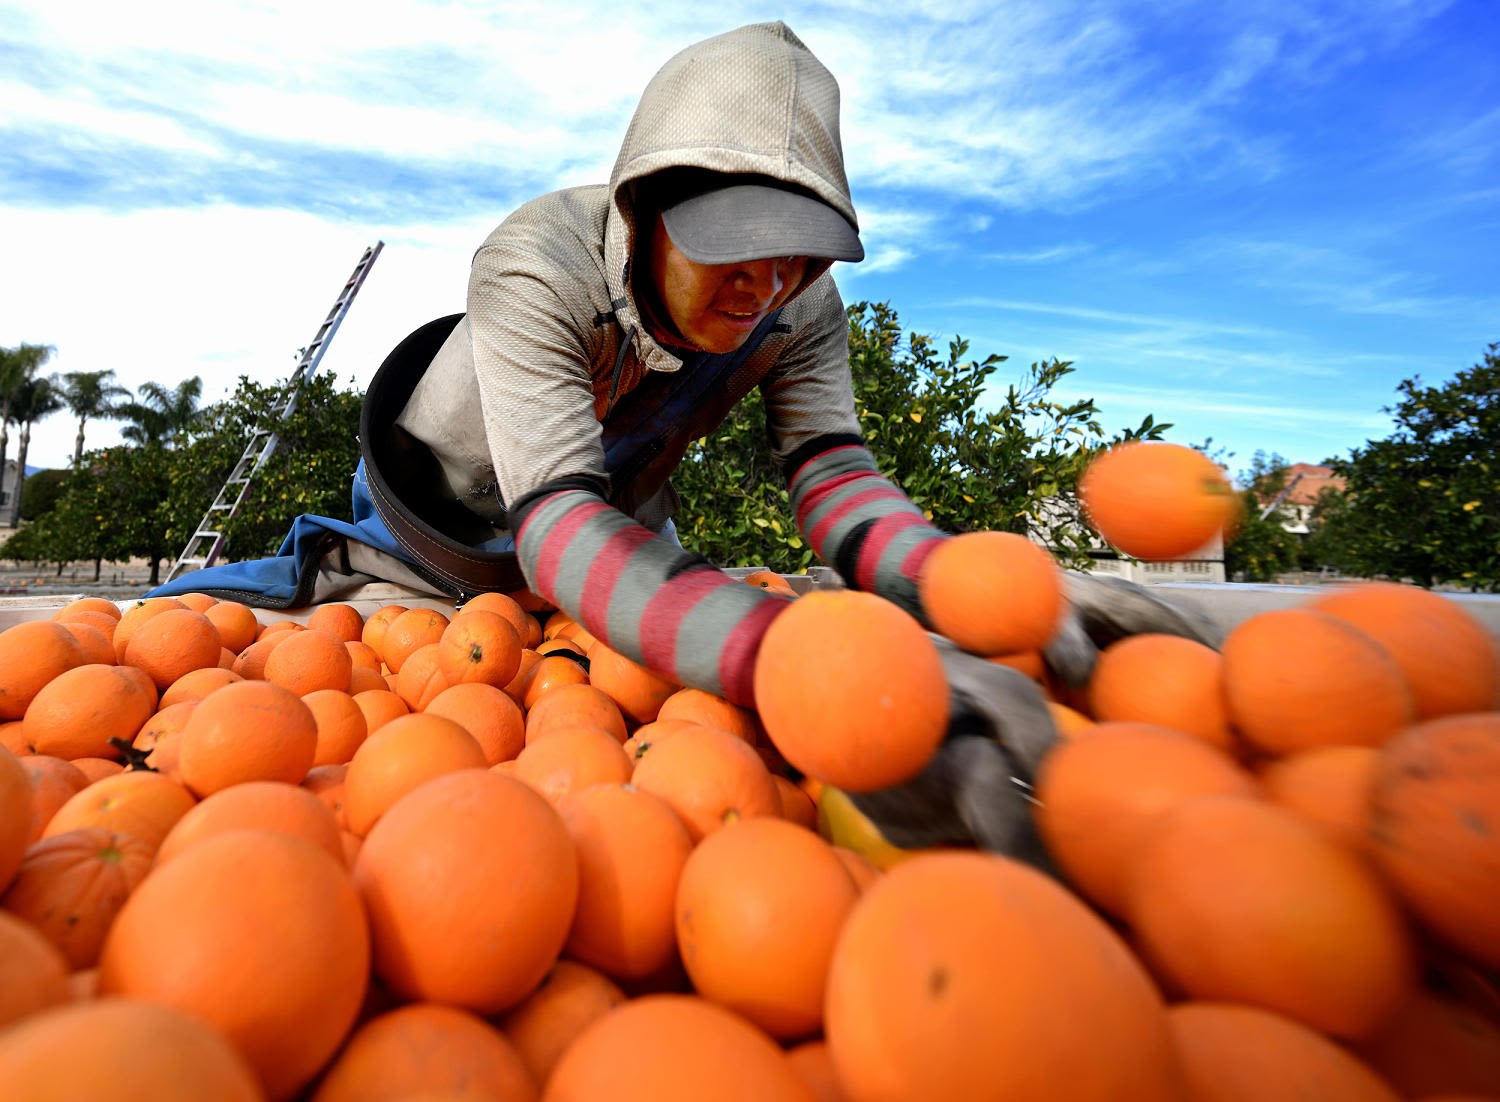 Orange juice prices are going through the roof — forcing some makers to consider alternative fruits